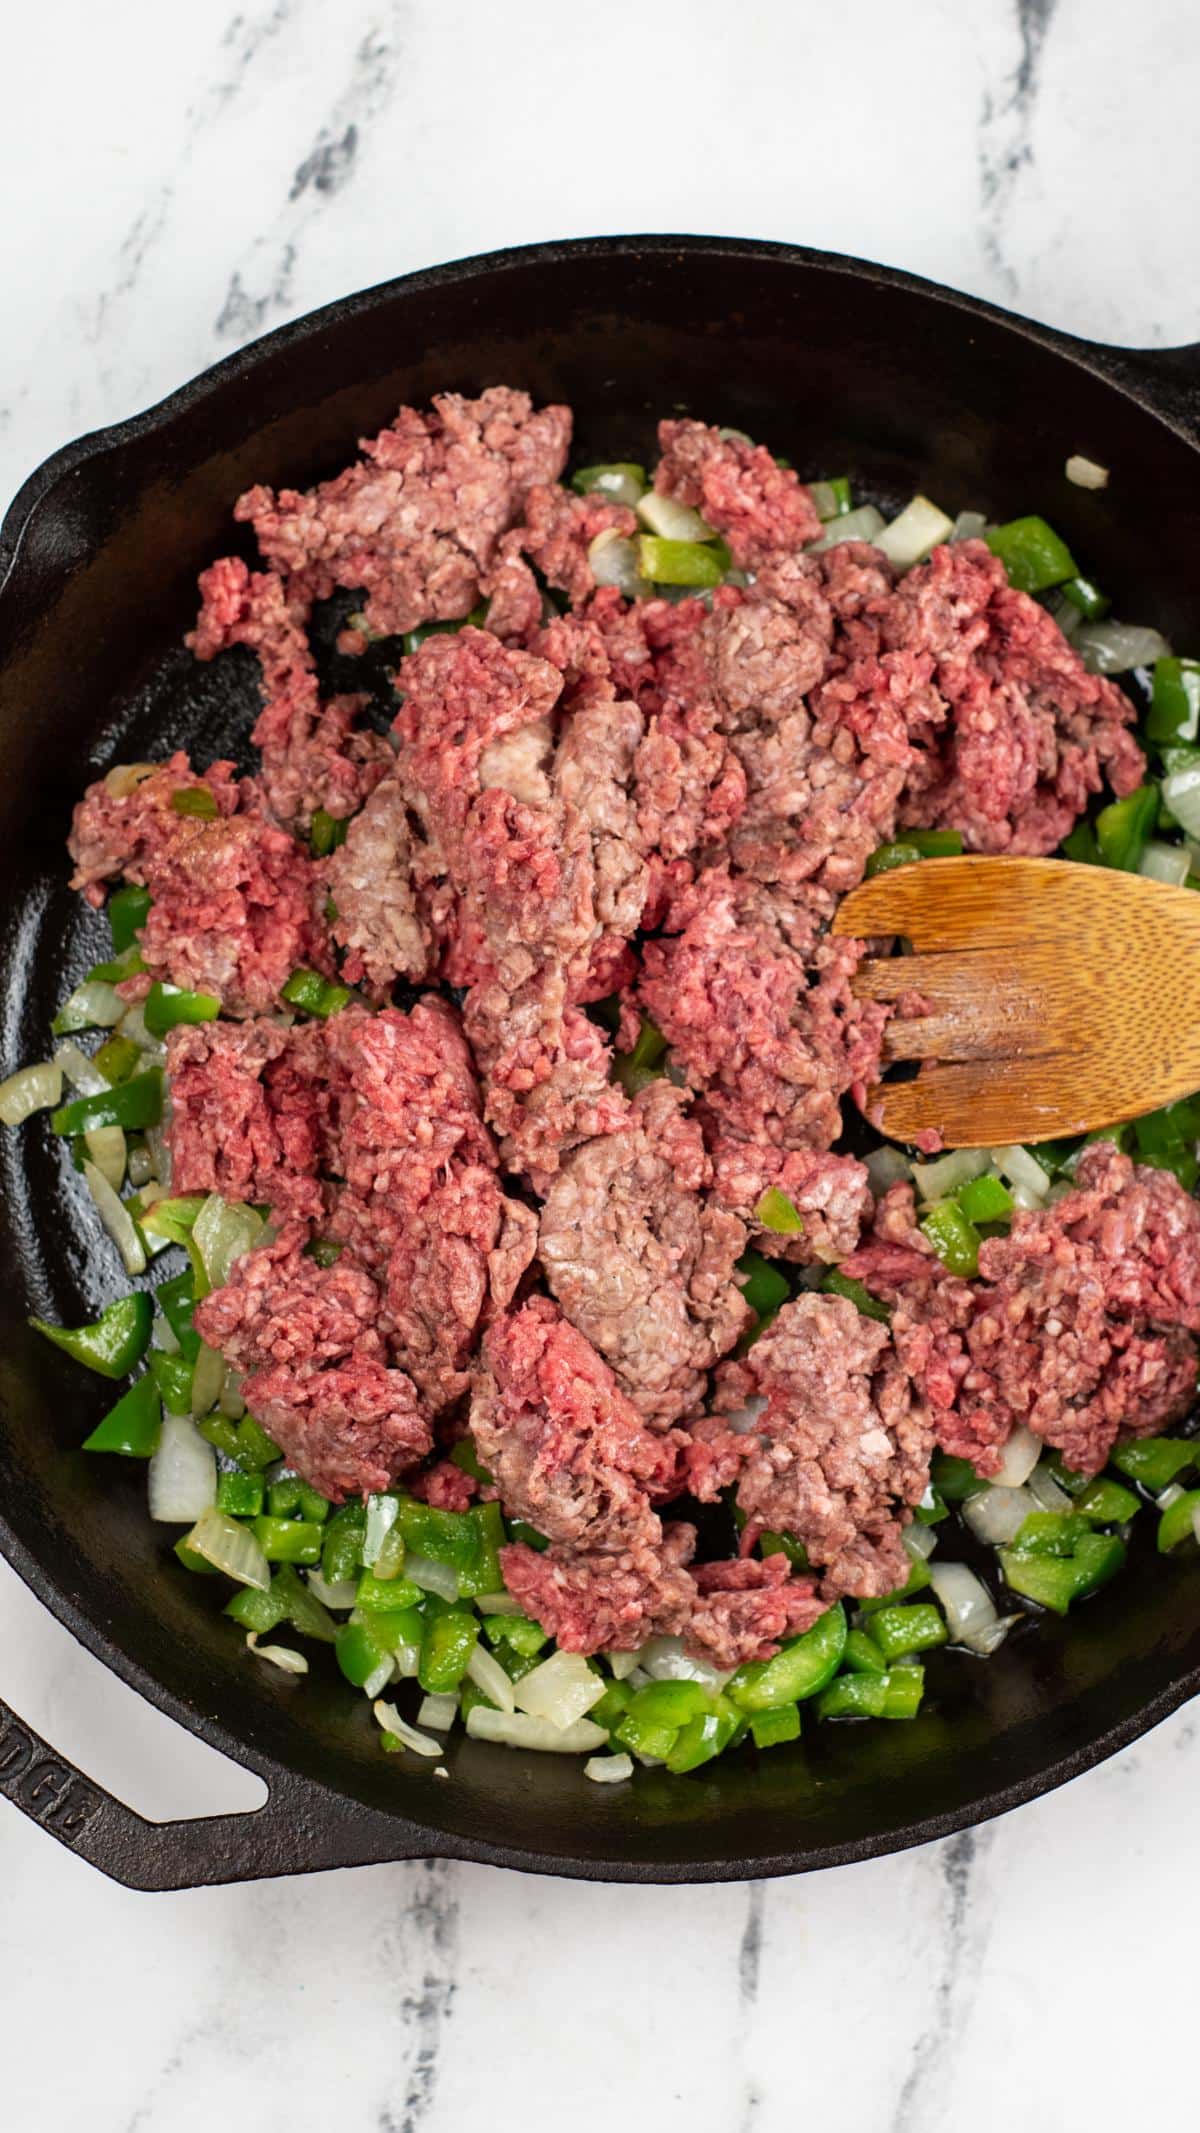 Meat added to pan.